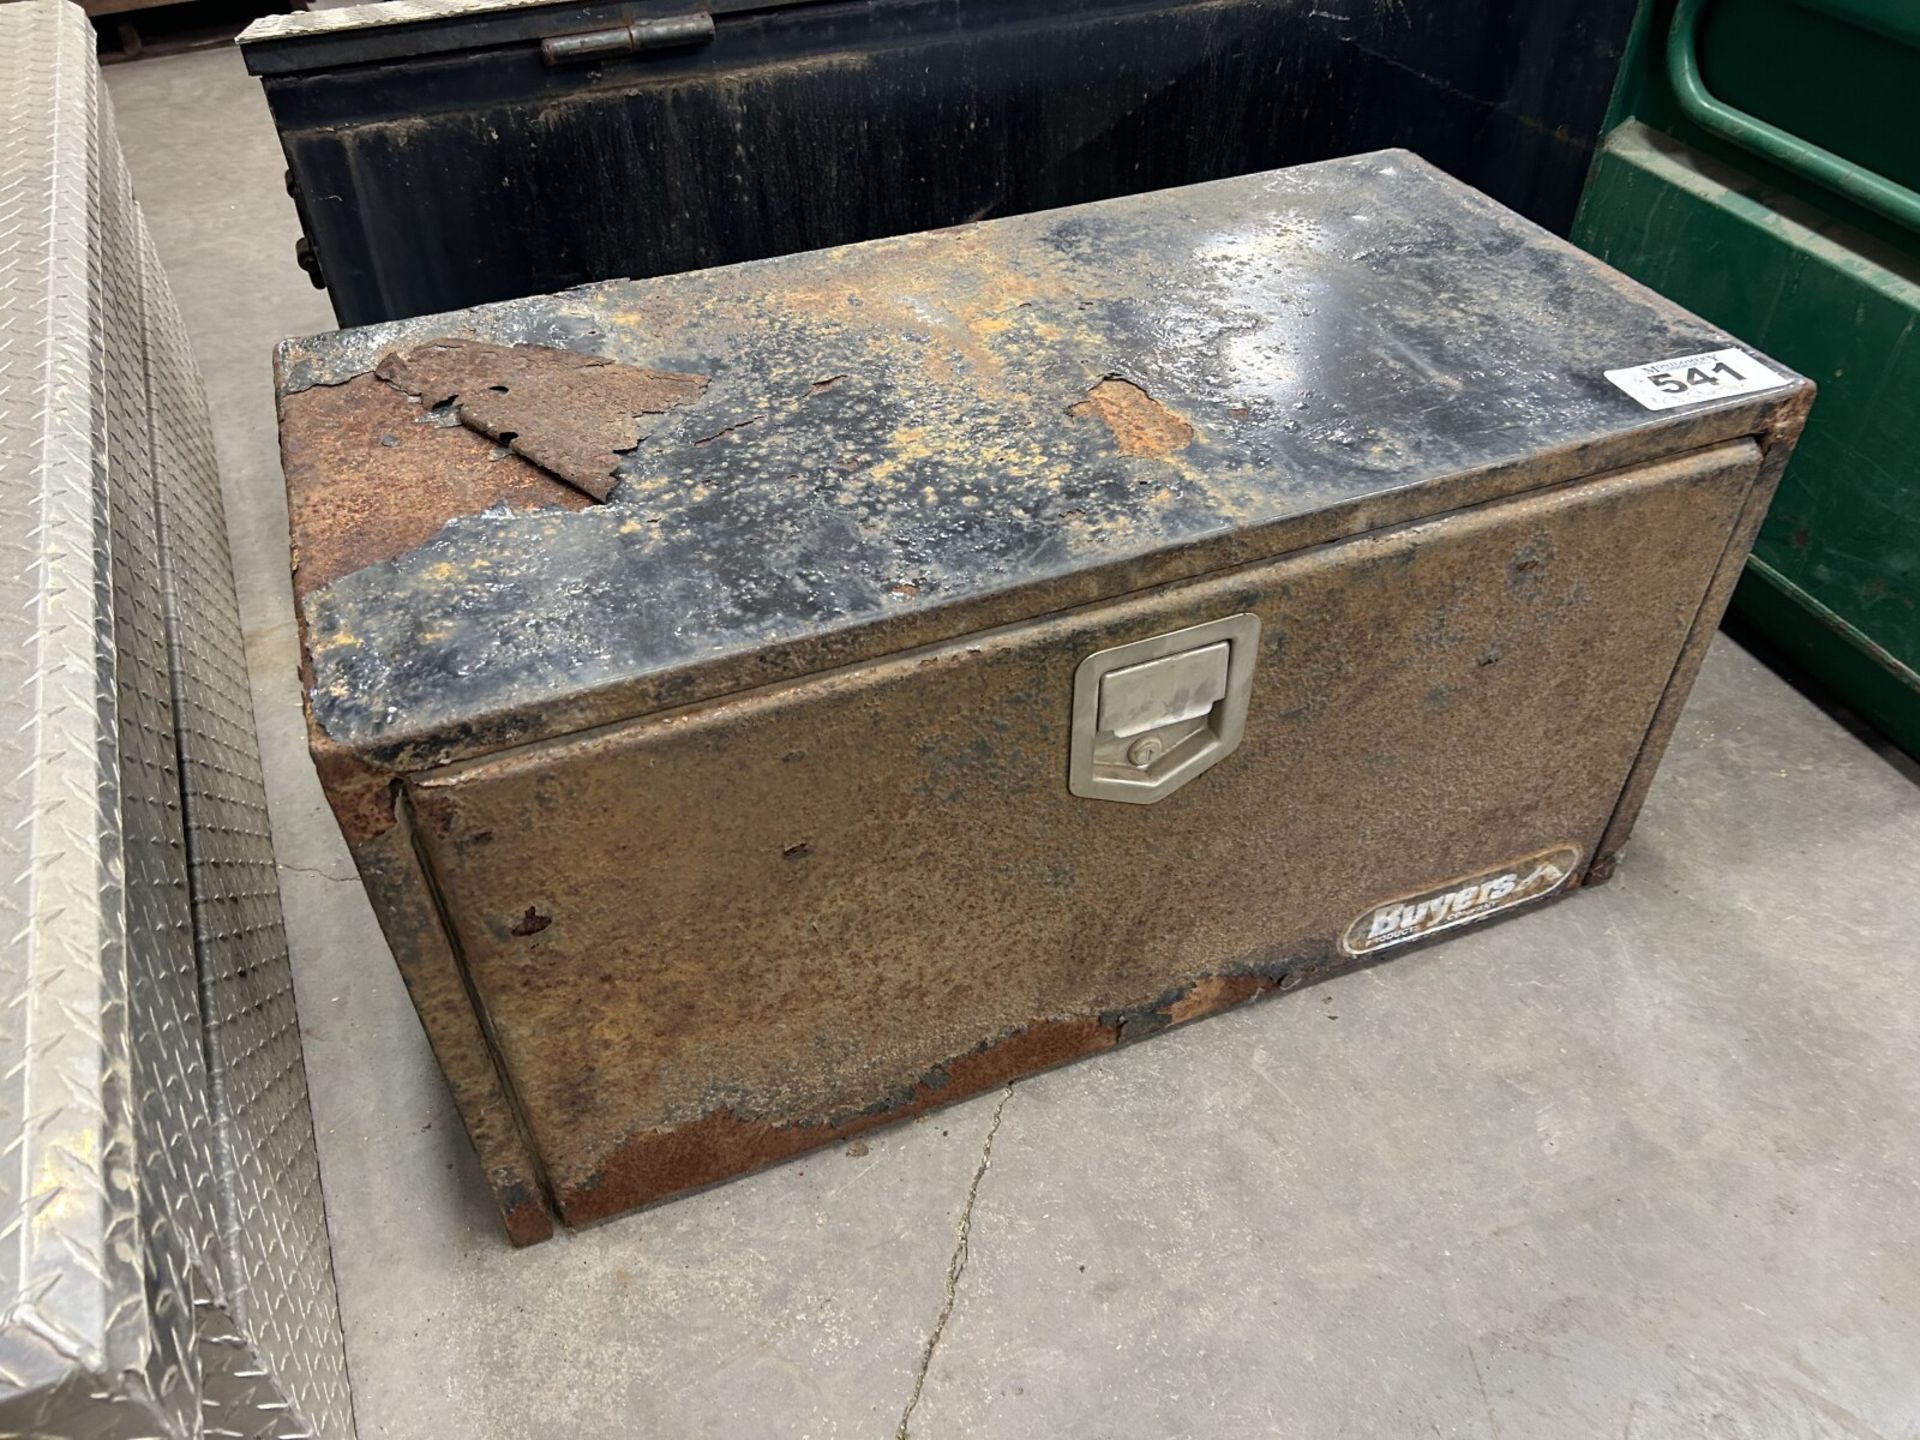 BUYERS HEAVY TRUCK TOOL BOX 36"x18"x18" (LATCH BROKEN, CONTENTS UNKNOWN) - Image 2 of 3